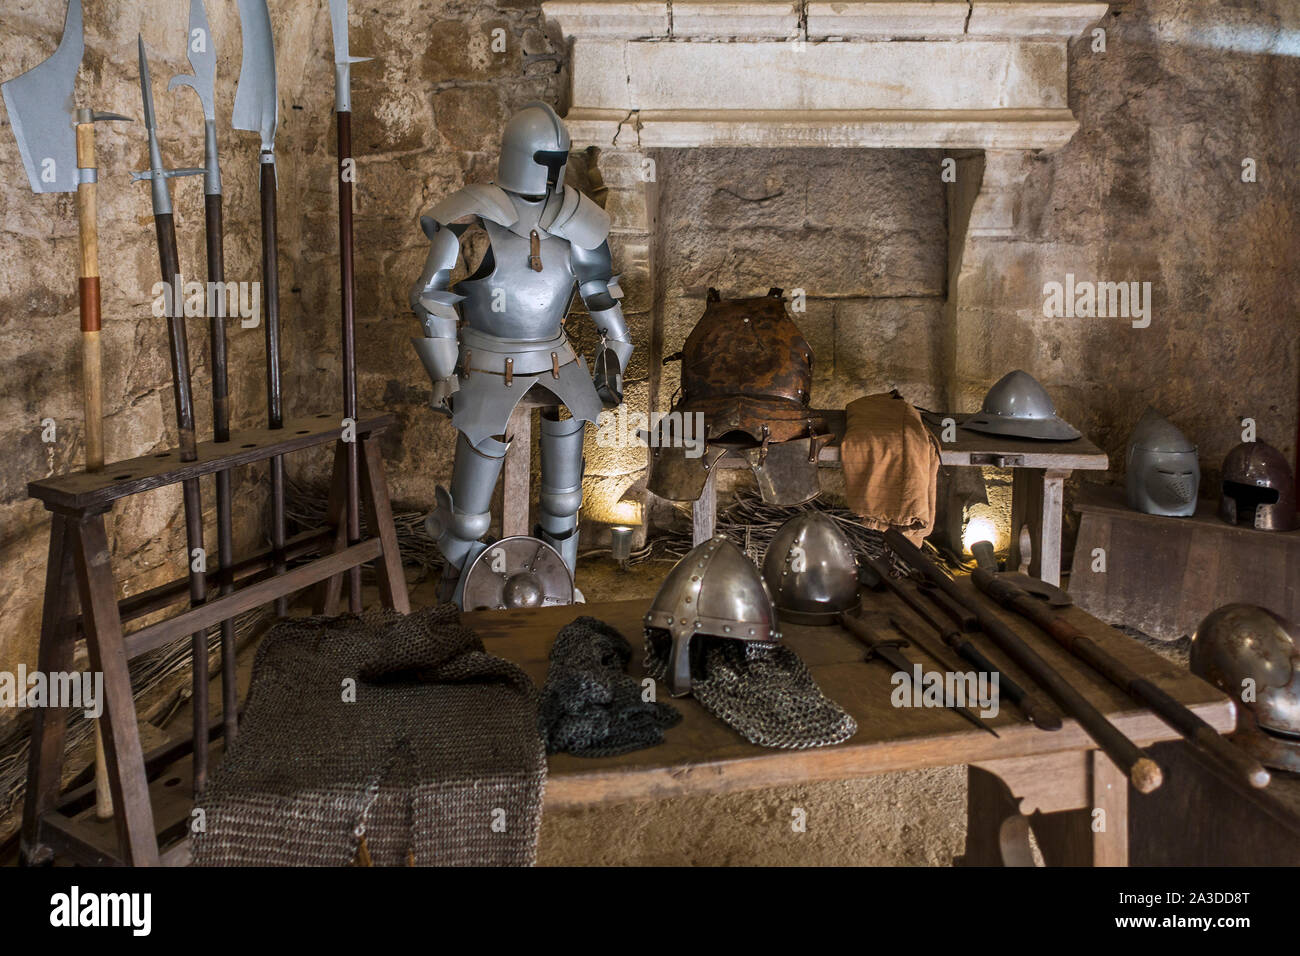 Suit of armour, halberds and weapons of the Middle Ages in armoury at the Château de Tiffauges, medieval castle, Vendée, France Stock Photo